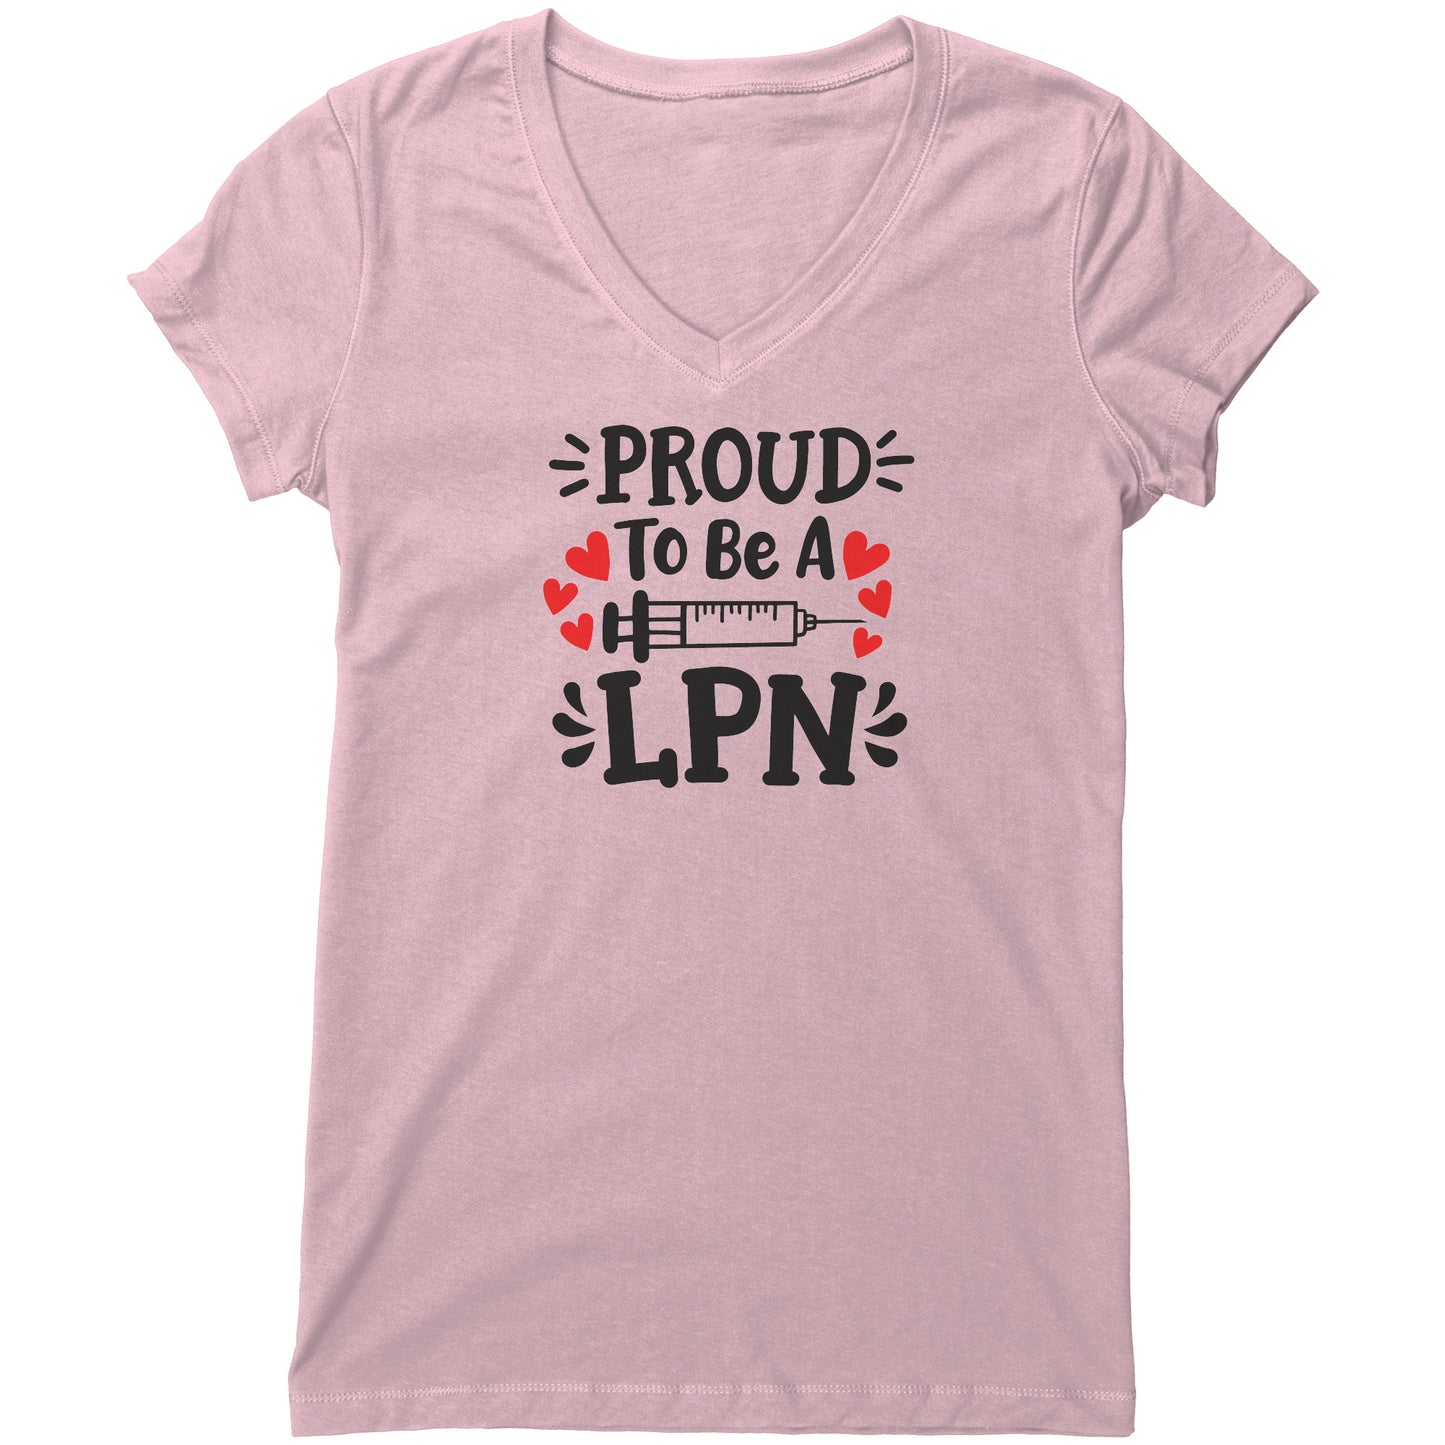 "Proud to be a LPN" Women's V-Neck T-Shirt with Needle Graphic – Relaxed Fit, Modern Style